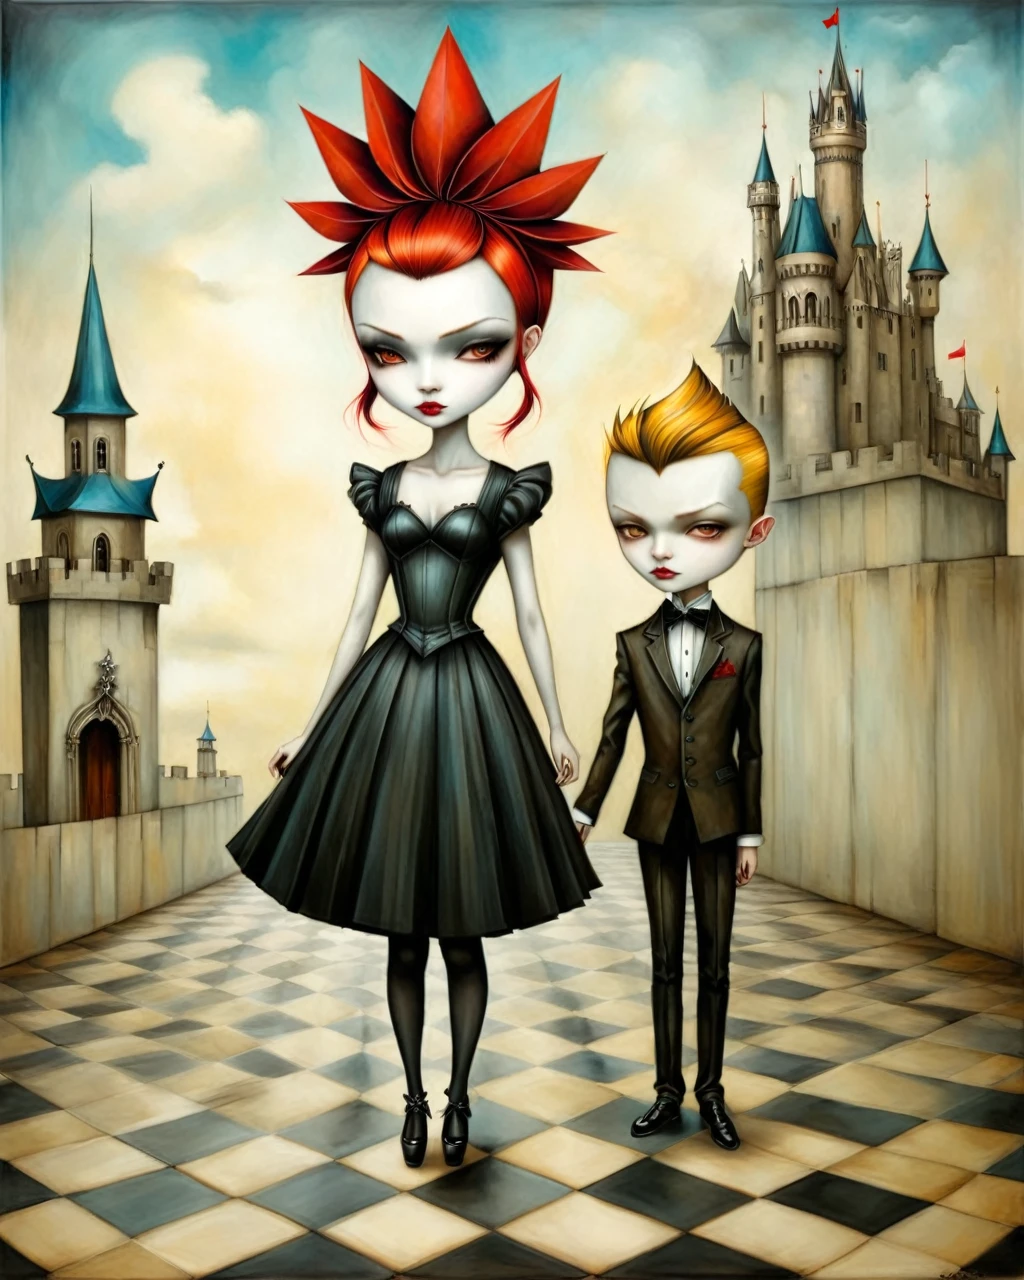 painting of a girl and boy gothic labyrinth sarah jareth david bowie masquerade ball castle mansion checkered floor origami style in the style of حاول أندروز,حاول أندروز style,حاول أندروز art,حاول أندروزa  حاول أندروز, أندروز إيساو آرت ستايل, inspired بواسطة عيسو أندروز, حاول أندروز ornate, بواسطة عيسو أندروز, حاول أندروز, inspired بواسطة ESAO, بواسطة ESAO,  إيرلي, حاول أندروز, بنيامين لاكومب, 1فتاة, 1 فتى, in the style of حاول أندروز, حاول أندروز . فن الورق, ورق مطوي, مطوية, فن اوريغامي, الطيات, قطع وأضعاف, 